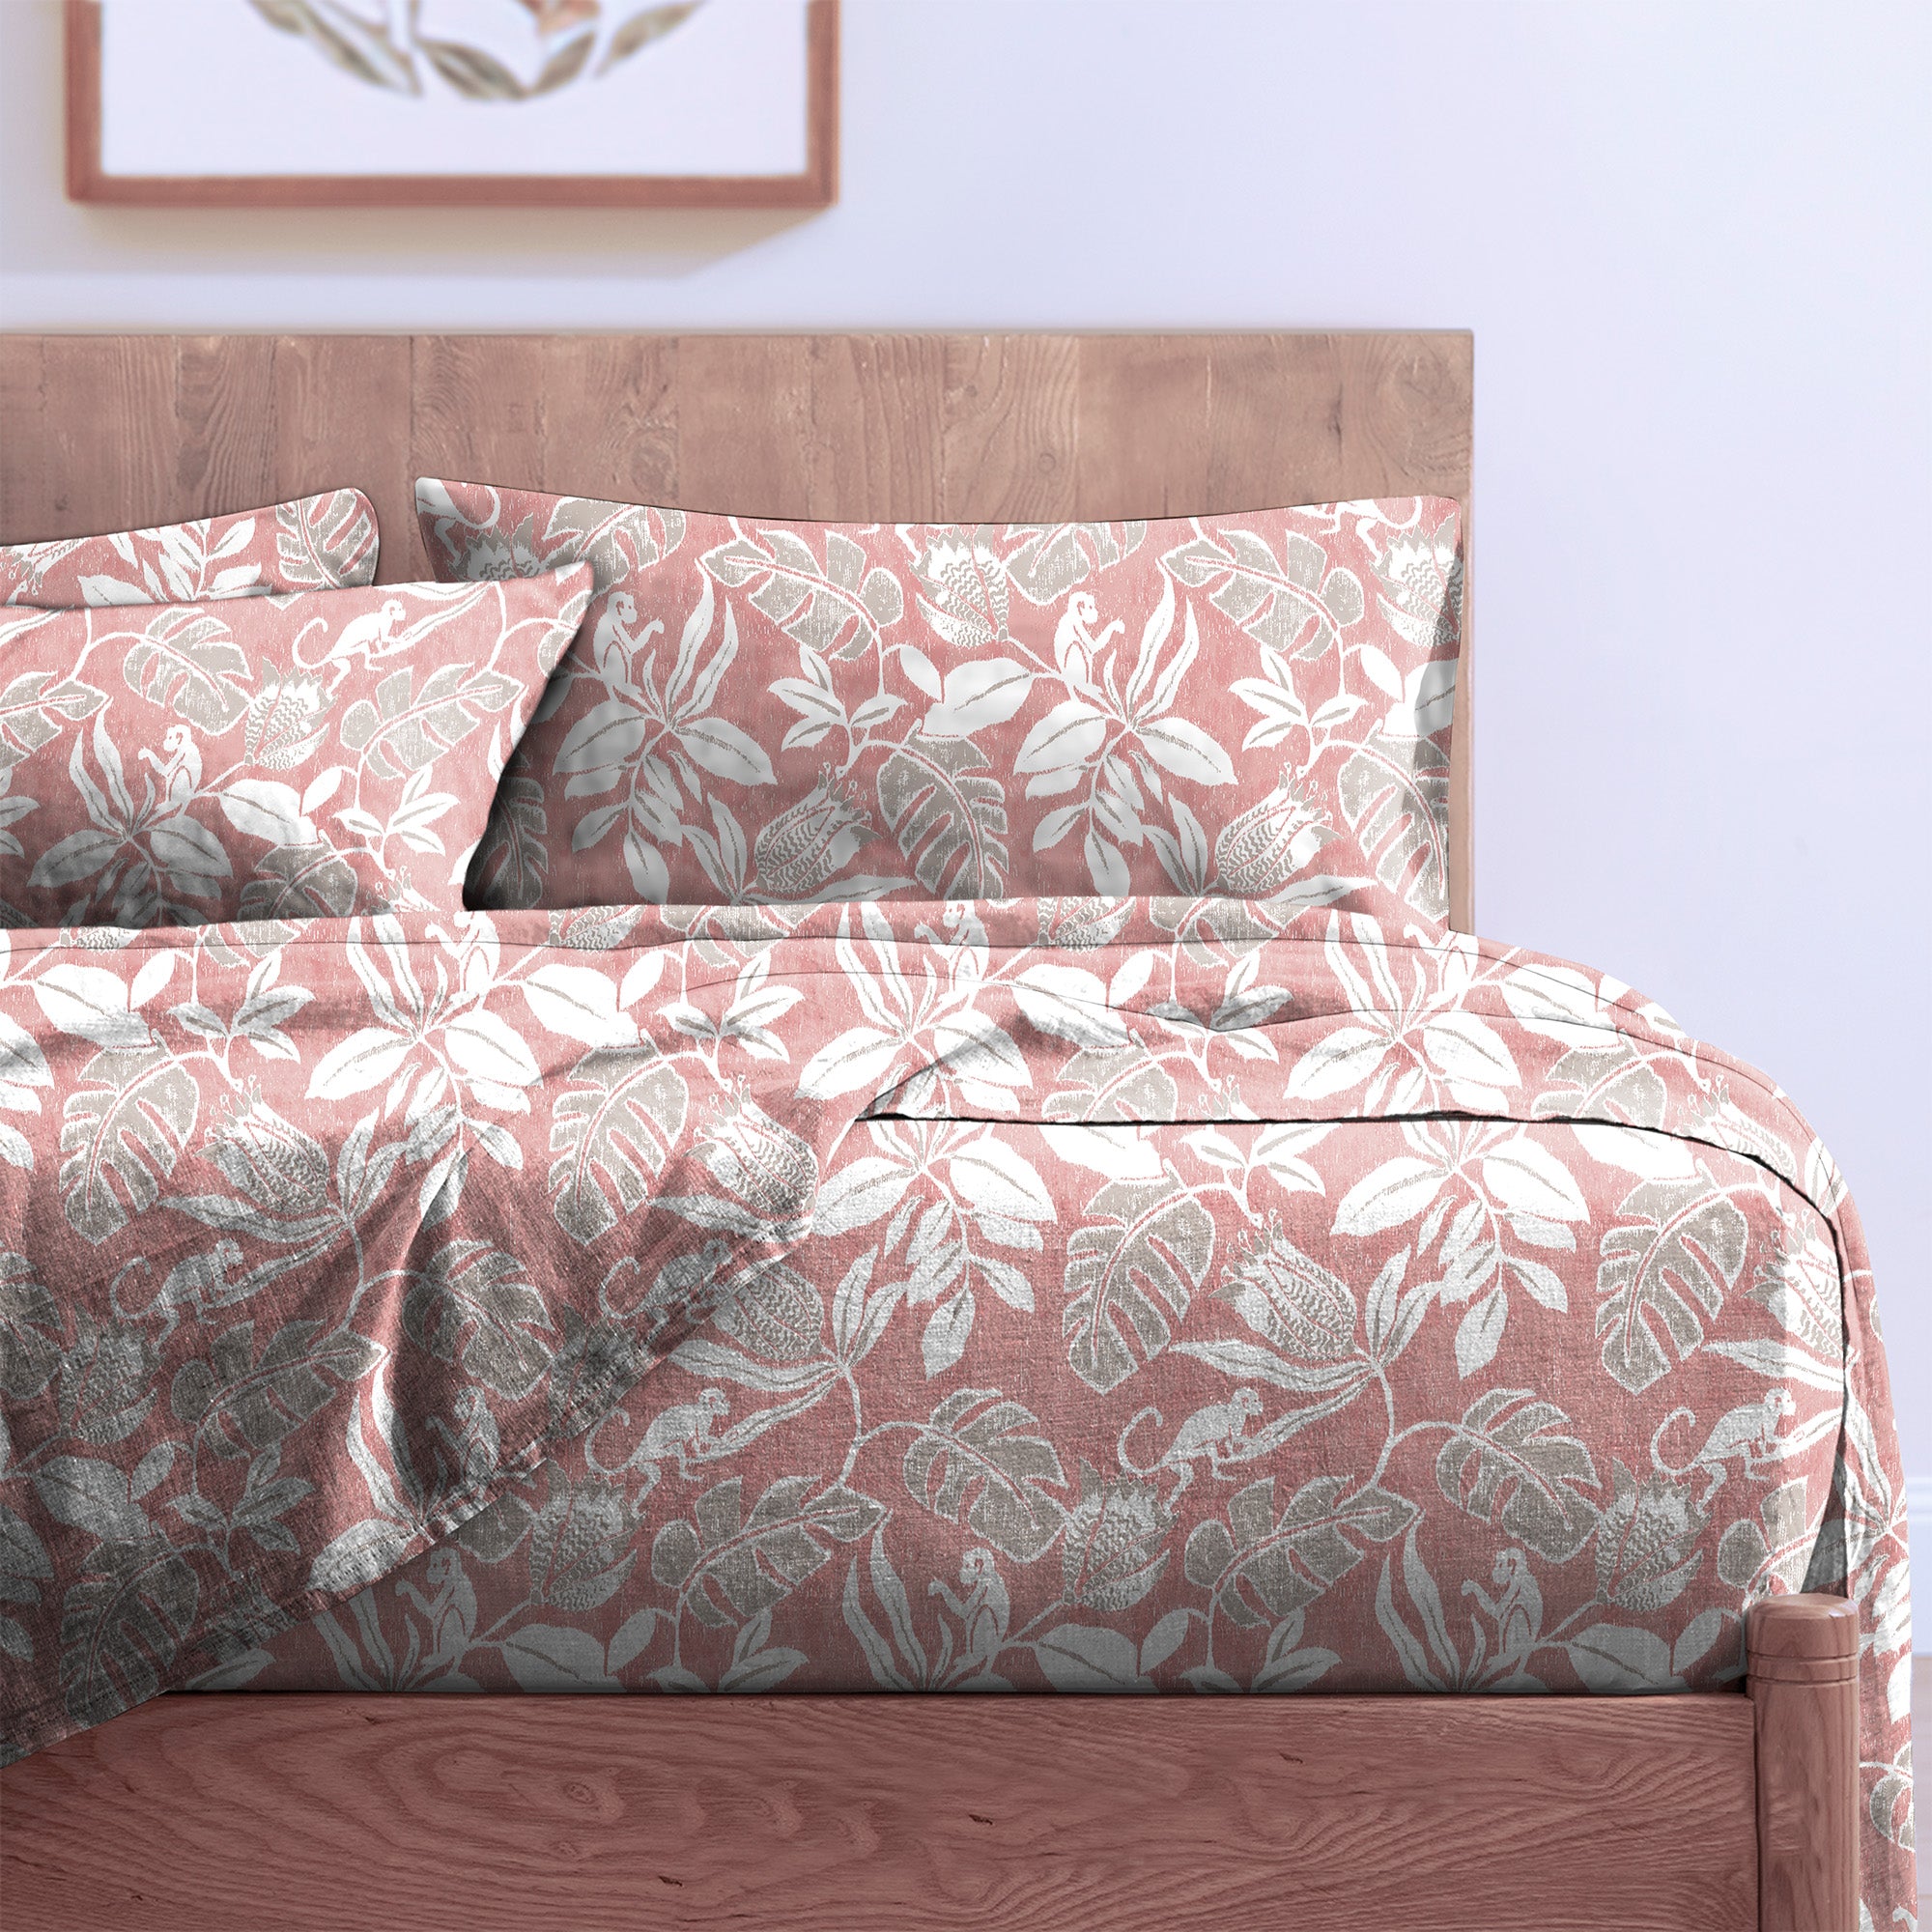 SAVANNA PINK BEDCOVER FOR DOUBLE BED WITH 2 PILLOWCOVERS KING SIZE (104" X 90")